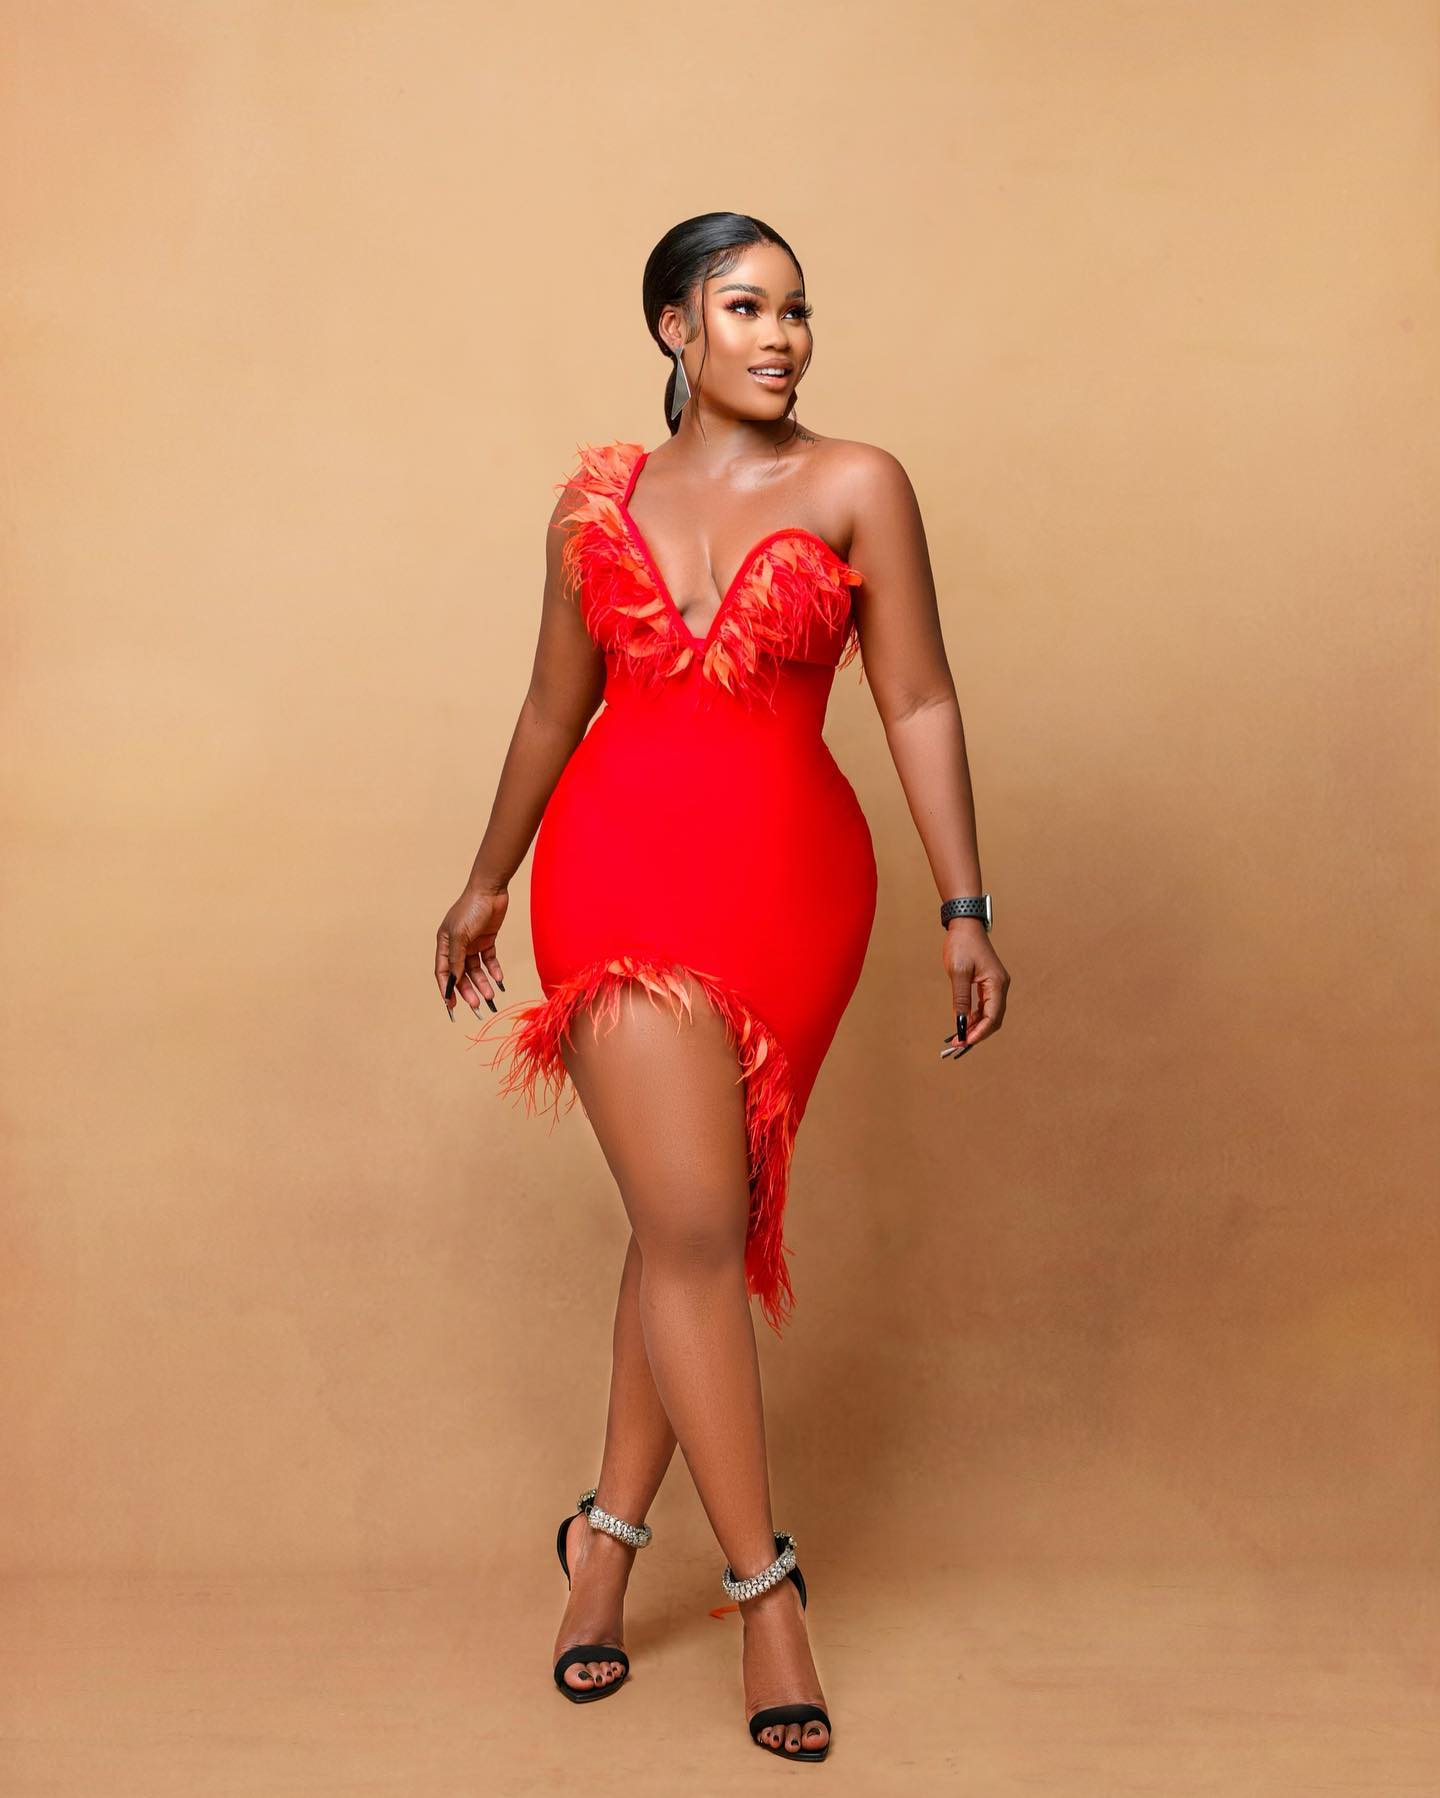 Ceec- Looking Stunning In A Red Gown